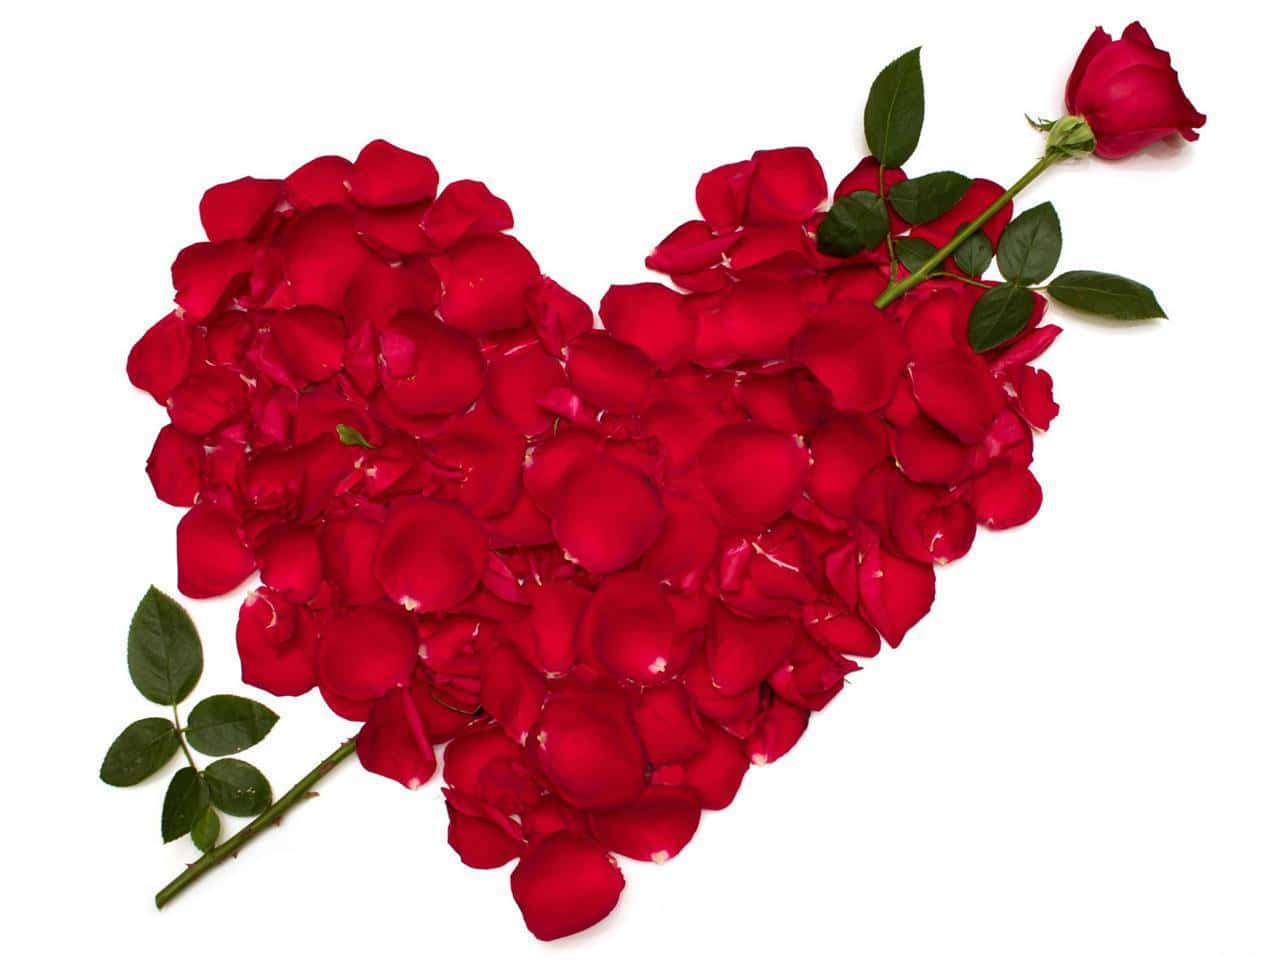 Heart Love Rose Flowers Picture